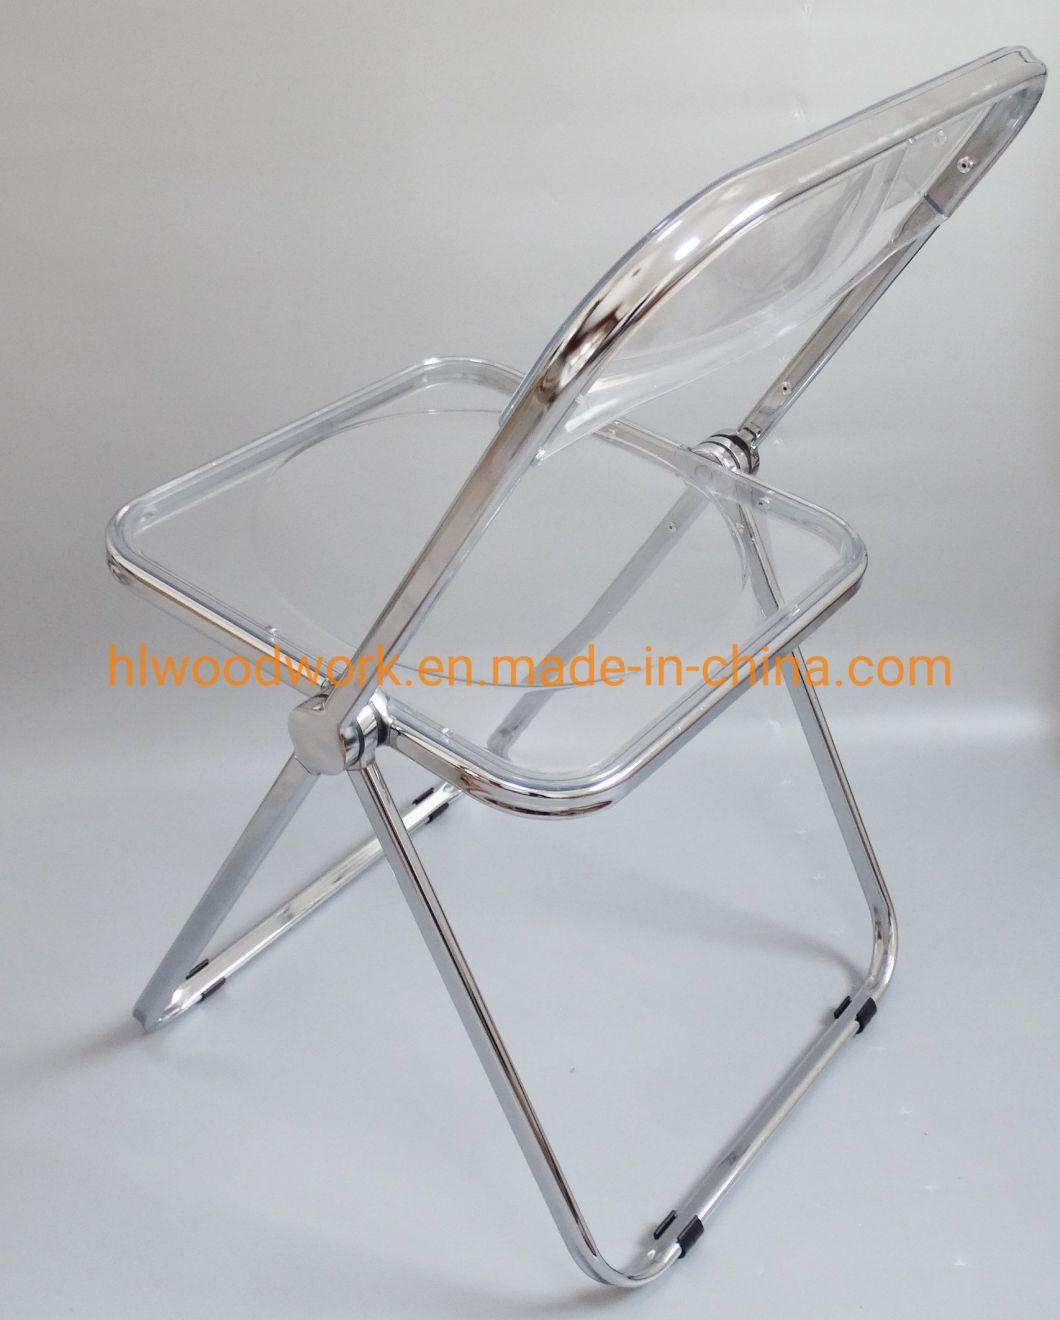 Modern Transparent Red Folding Chair PC Plastic Resteraunt Chair Chrome Frame Office Bar Dining Leisure Banquet Wedding Meeting Chair Plastic Dining Chair